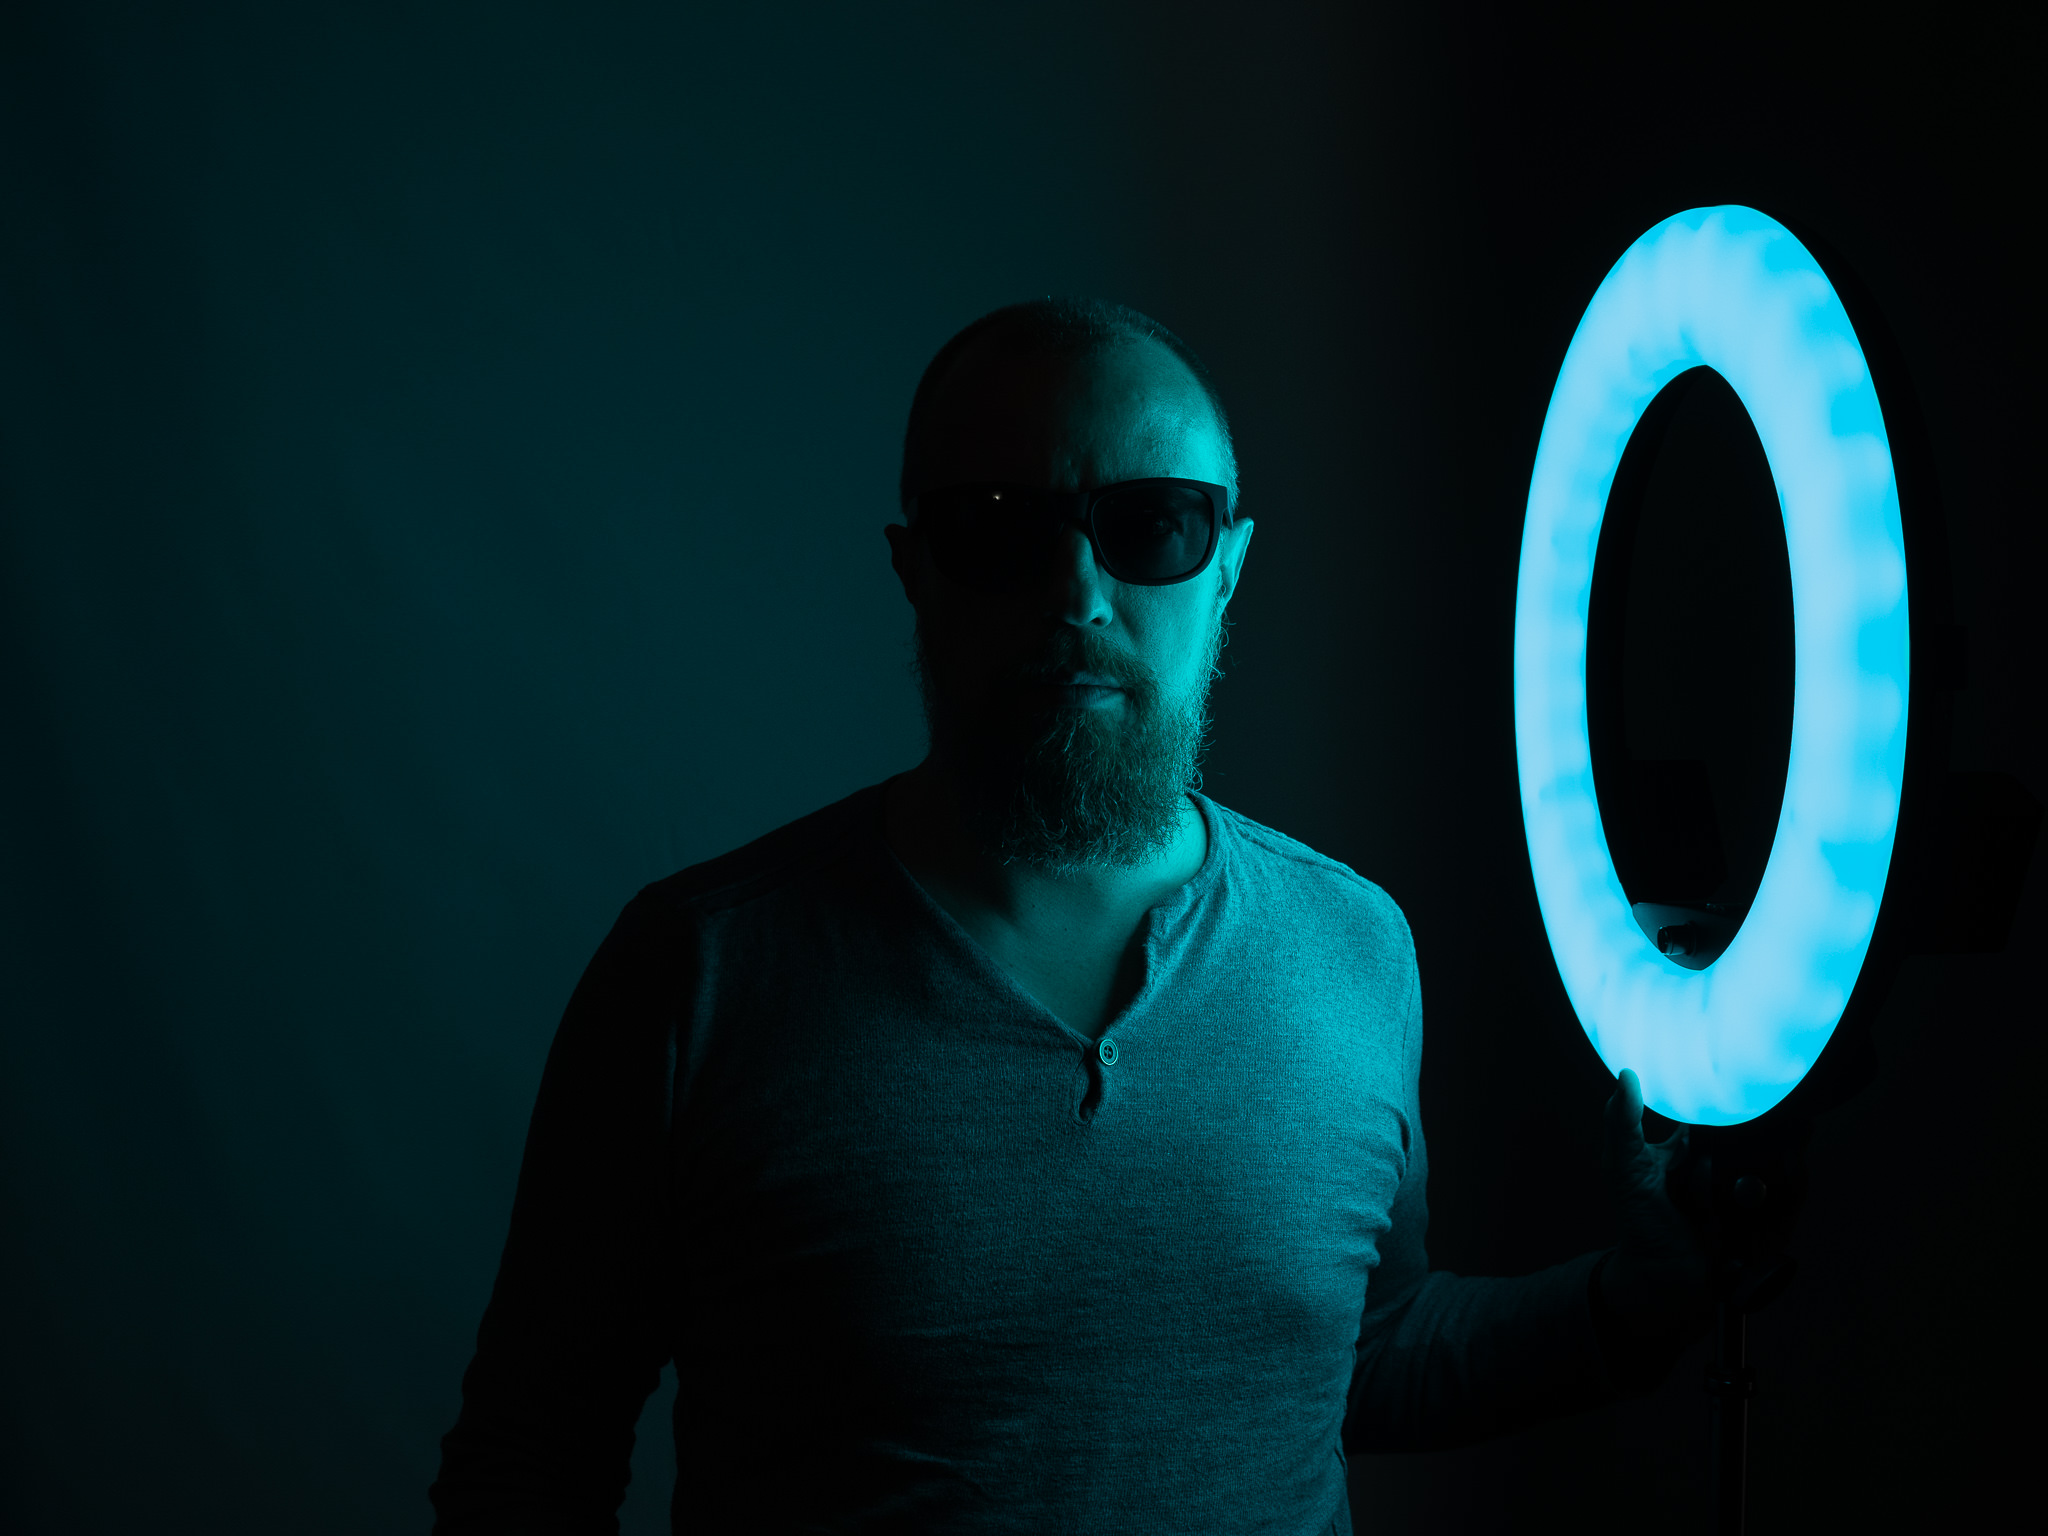 Photo taken with Prismatic Spectra RGB Rainbow LED Ring Light in blue colors